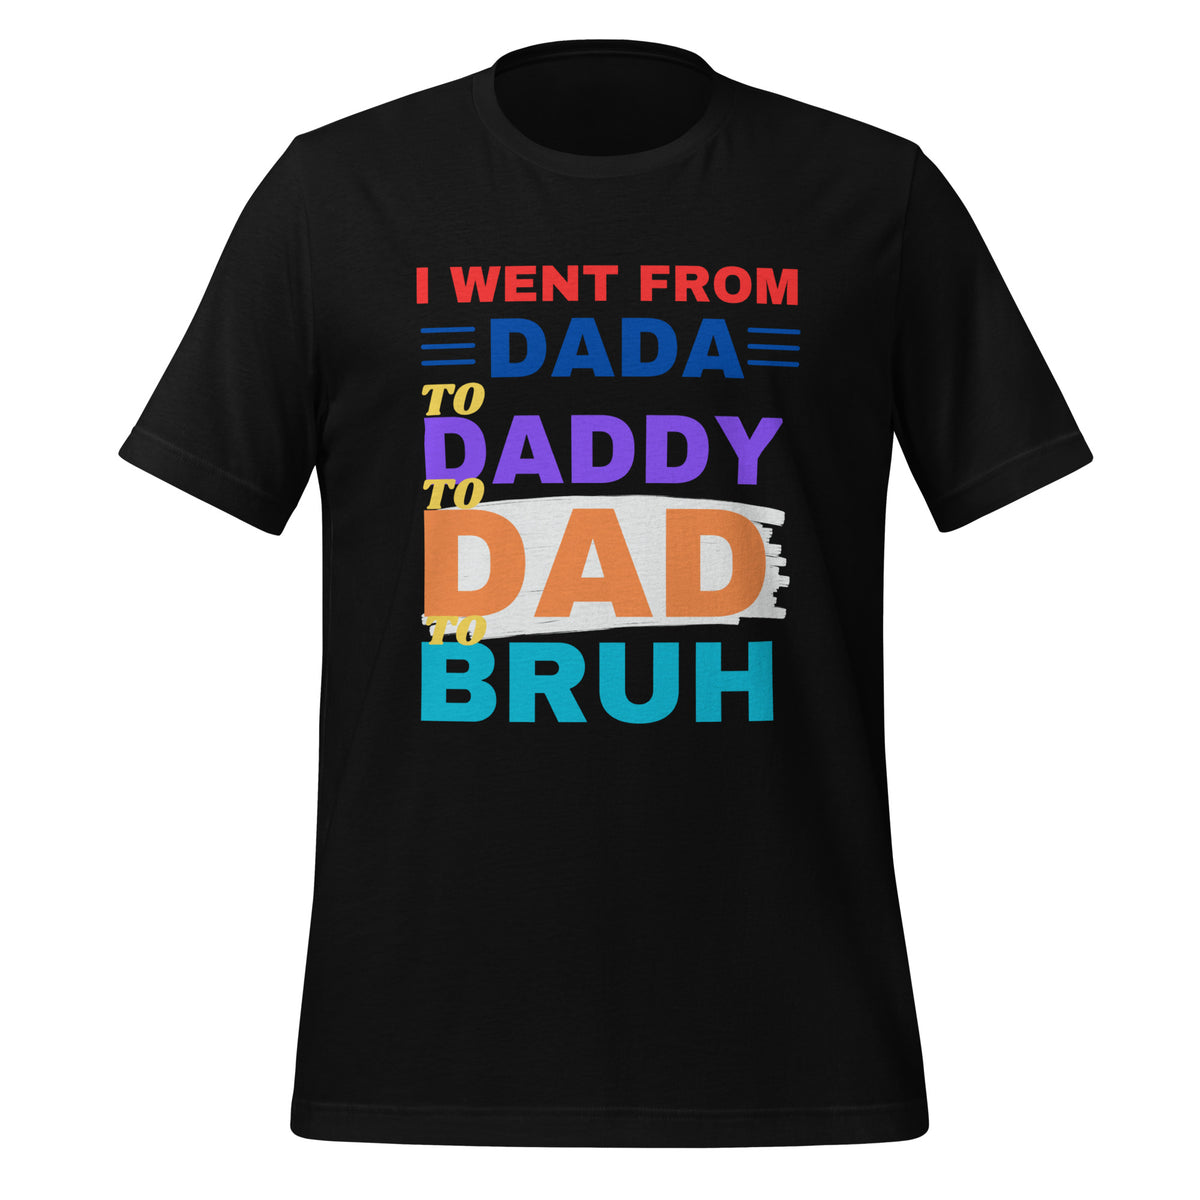 UNISEX T-SHIRT - I WENT FROM DADA TO DADDY TO DAD TO BRUH